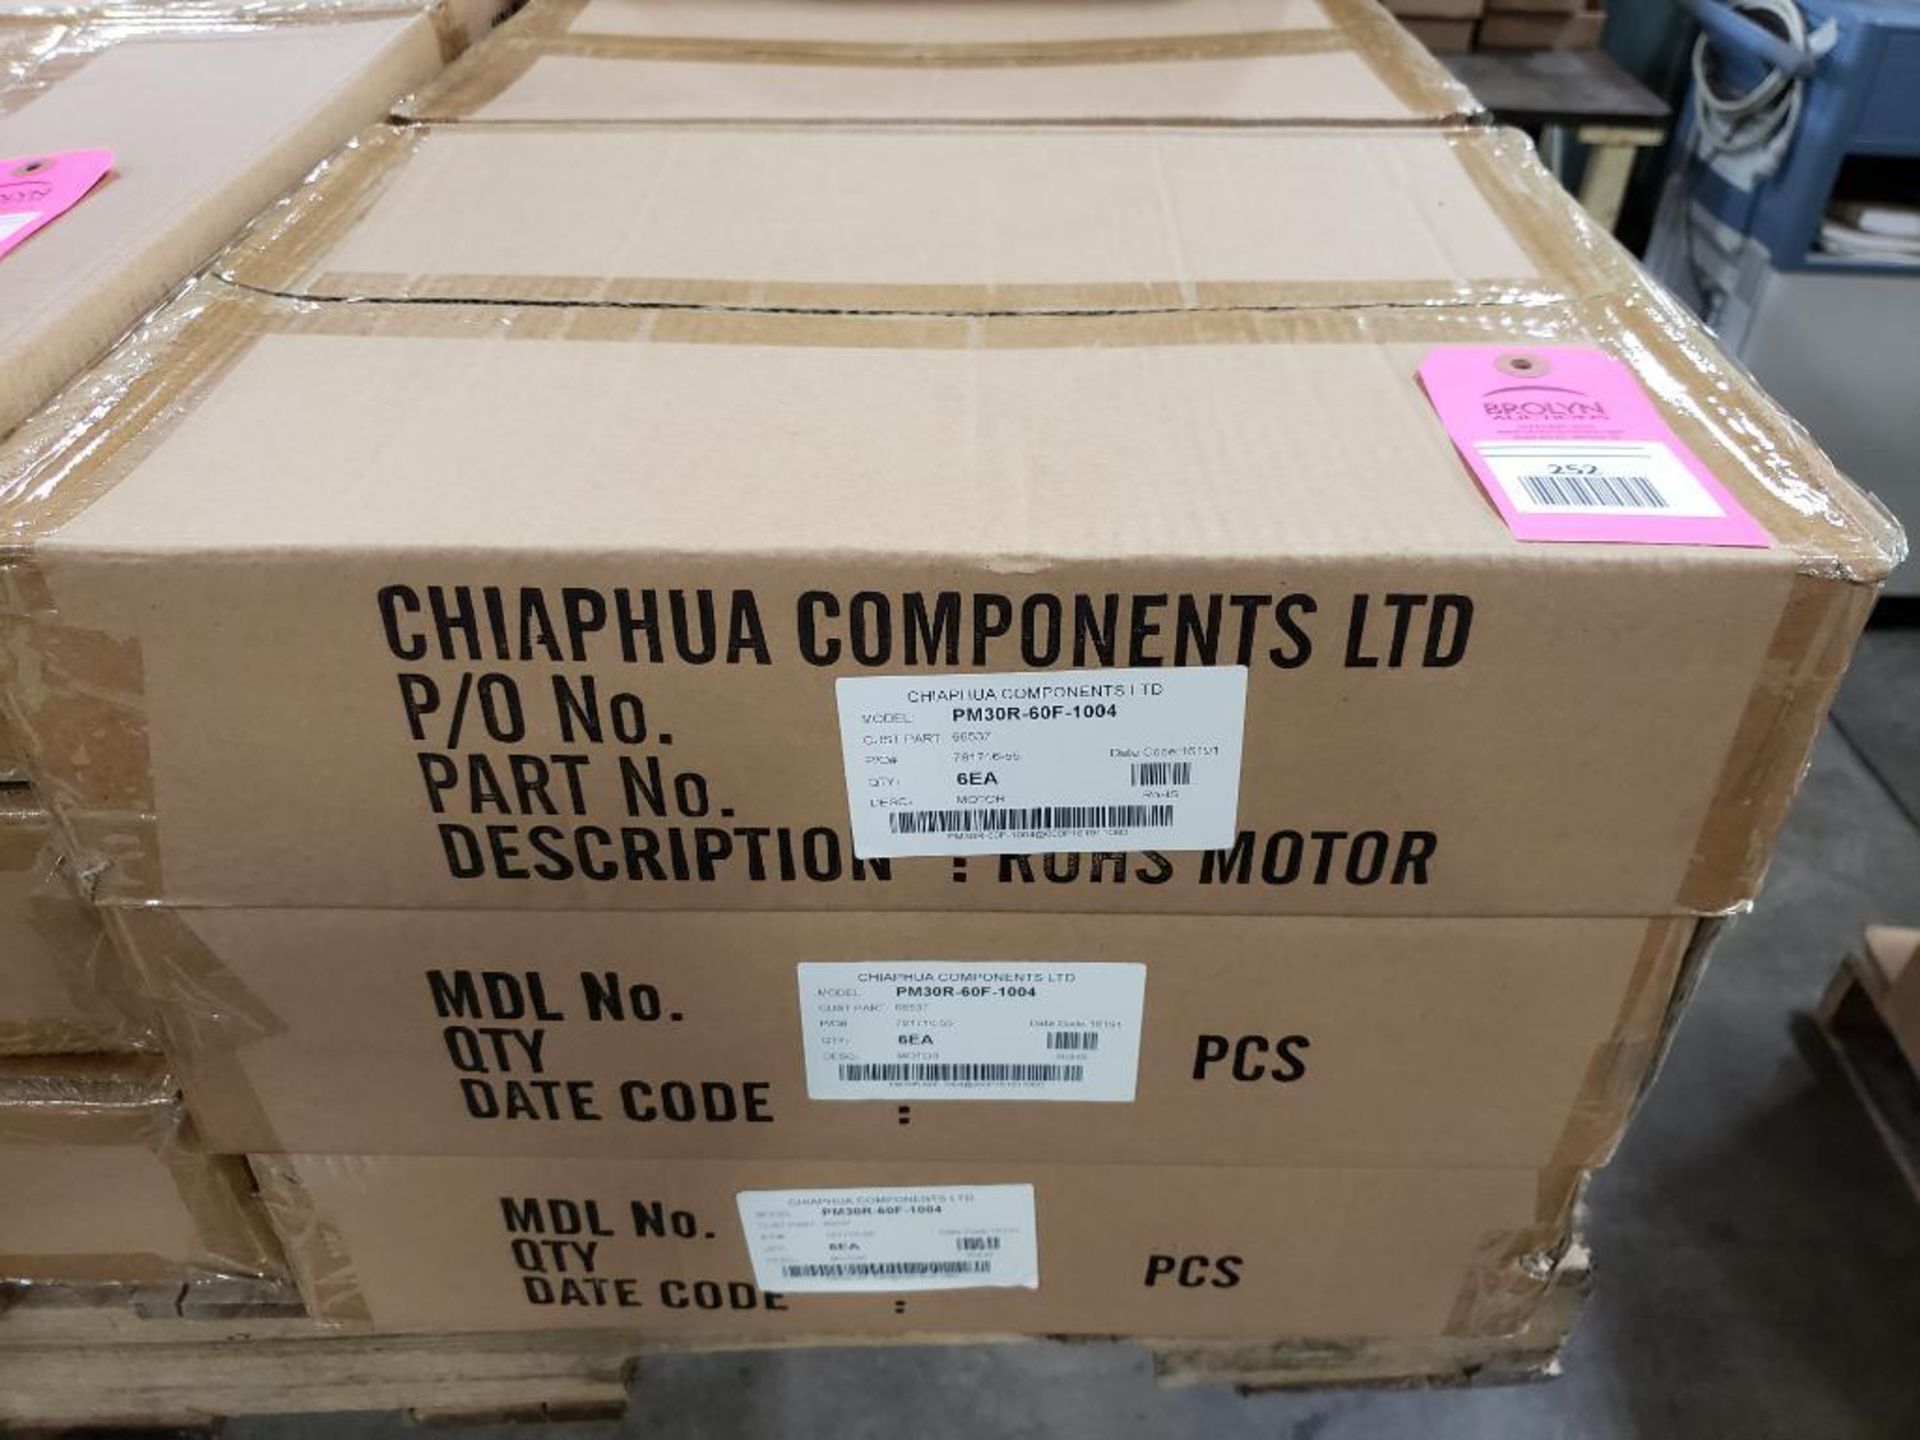 Qty 18 - Chiaphua components PM30R-60F-1004. Atwood Mobile 66537 12VDC Motors. New in box.